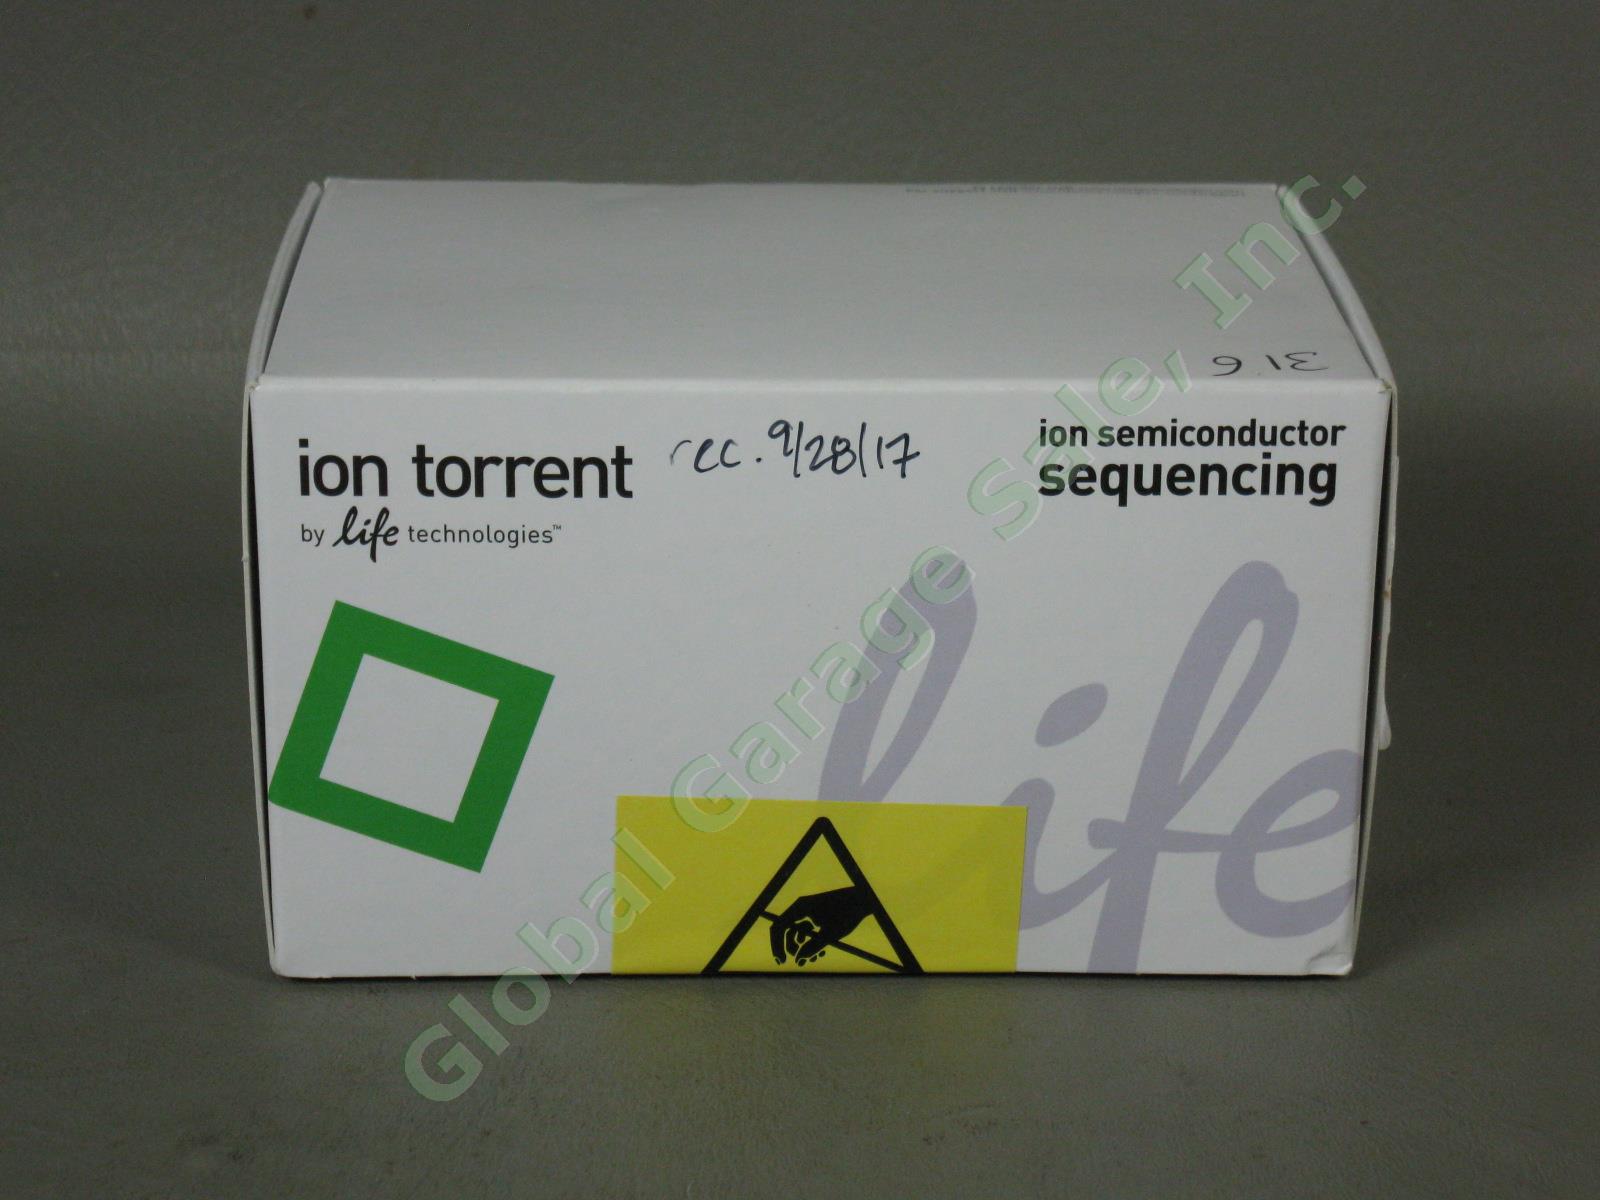 NEW! Sealed Life Technologies Ion Torrent Sequencing 316 Chip Kit V2 4-Pack